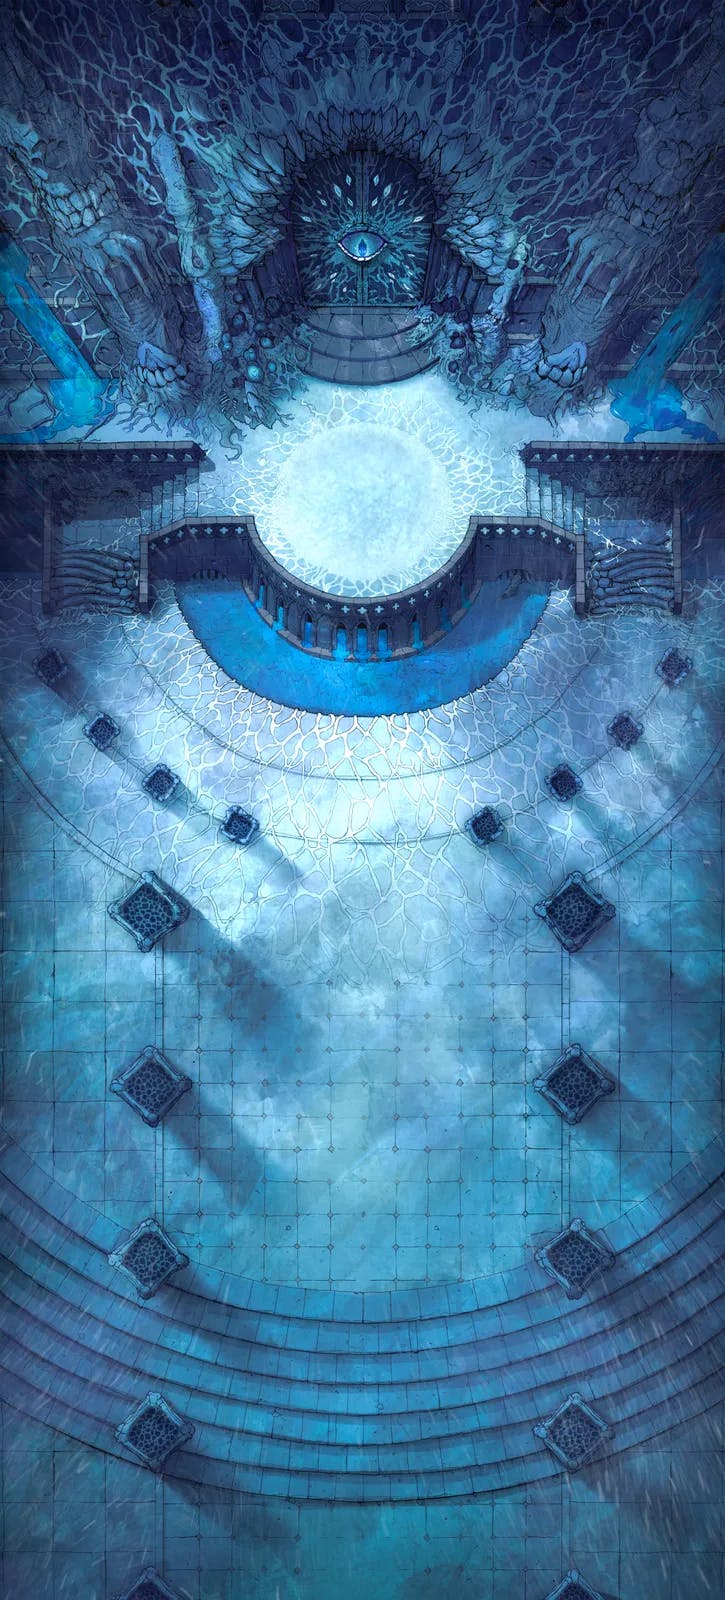 Nightmare Dragon Lair map, Cold Ice variant